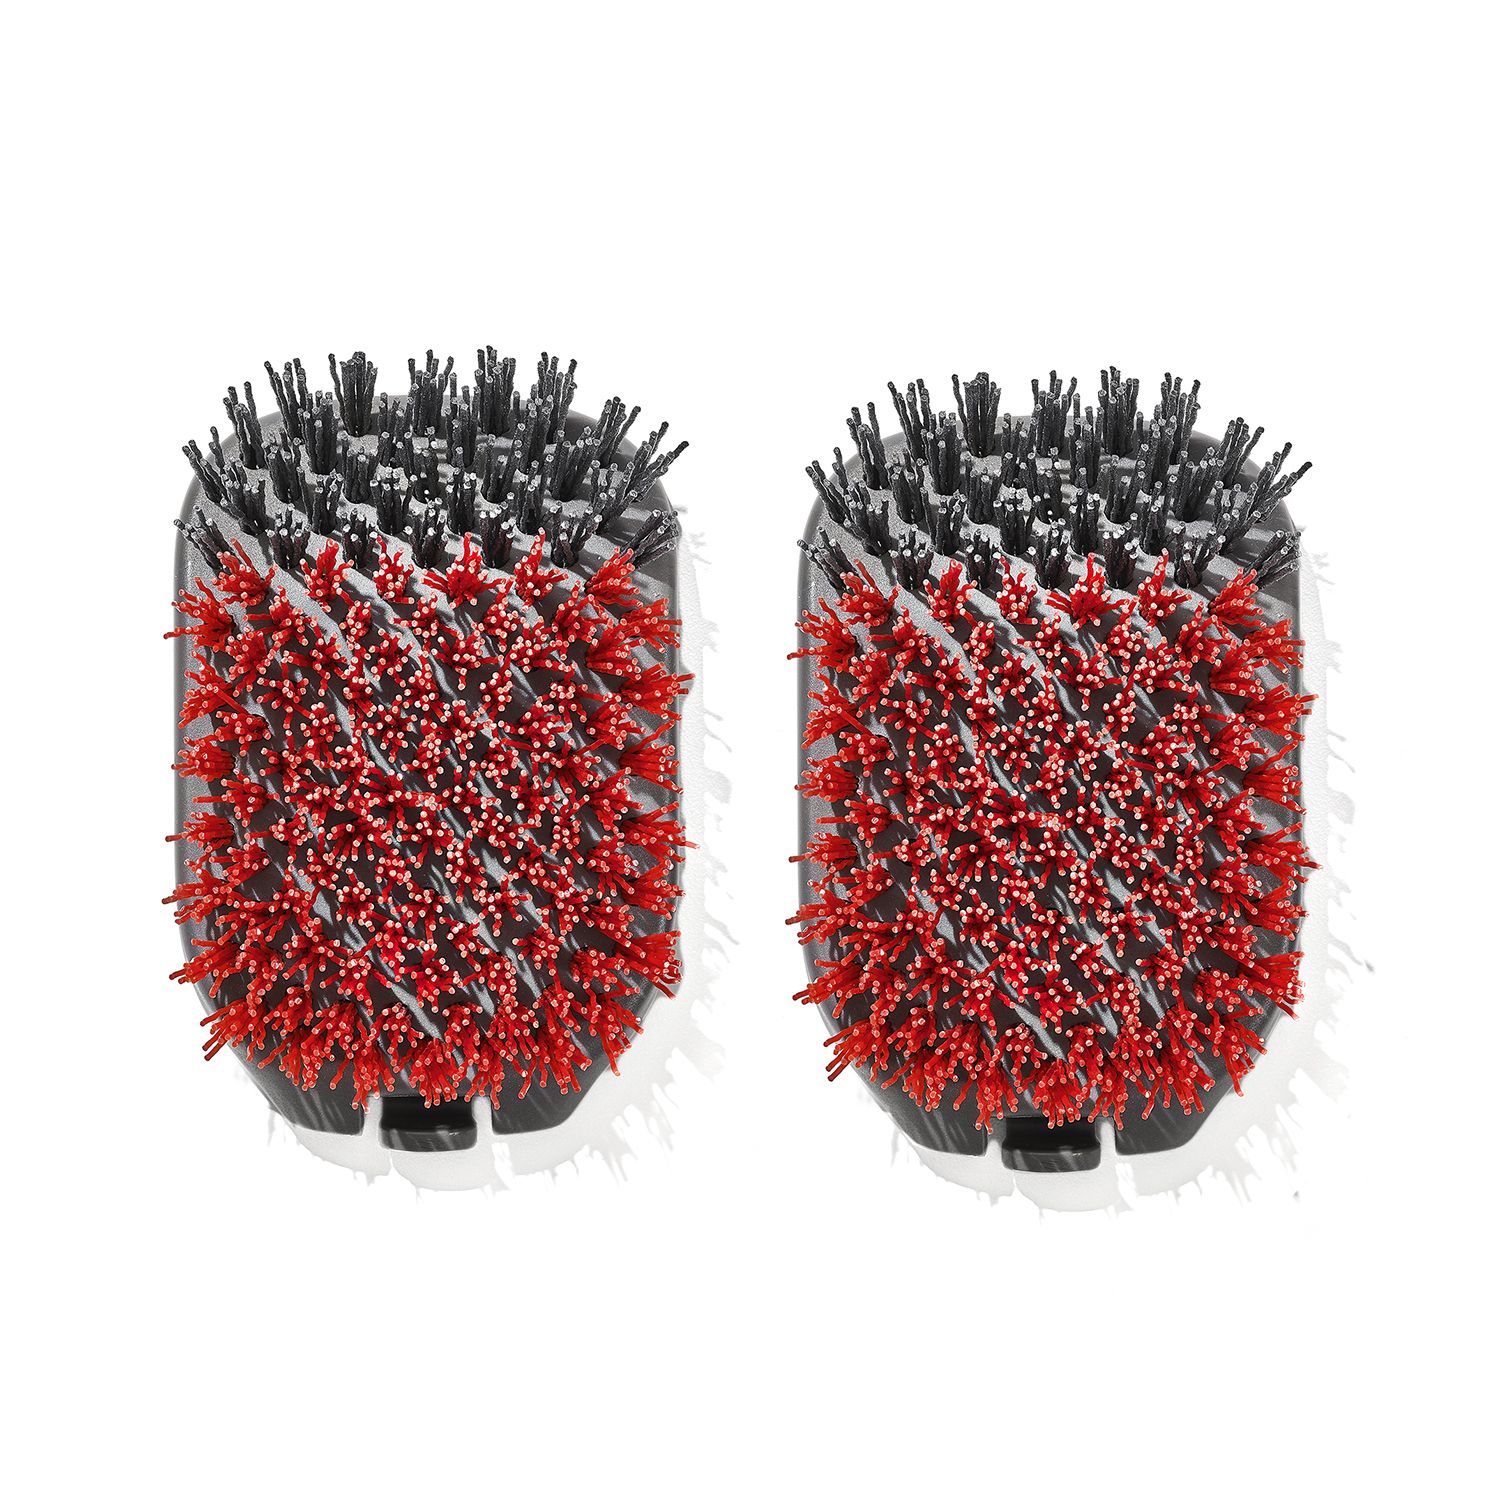 OXO Good Grips Bristle-Free Coiled Grill Brush Replaceable Head